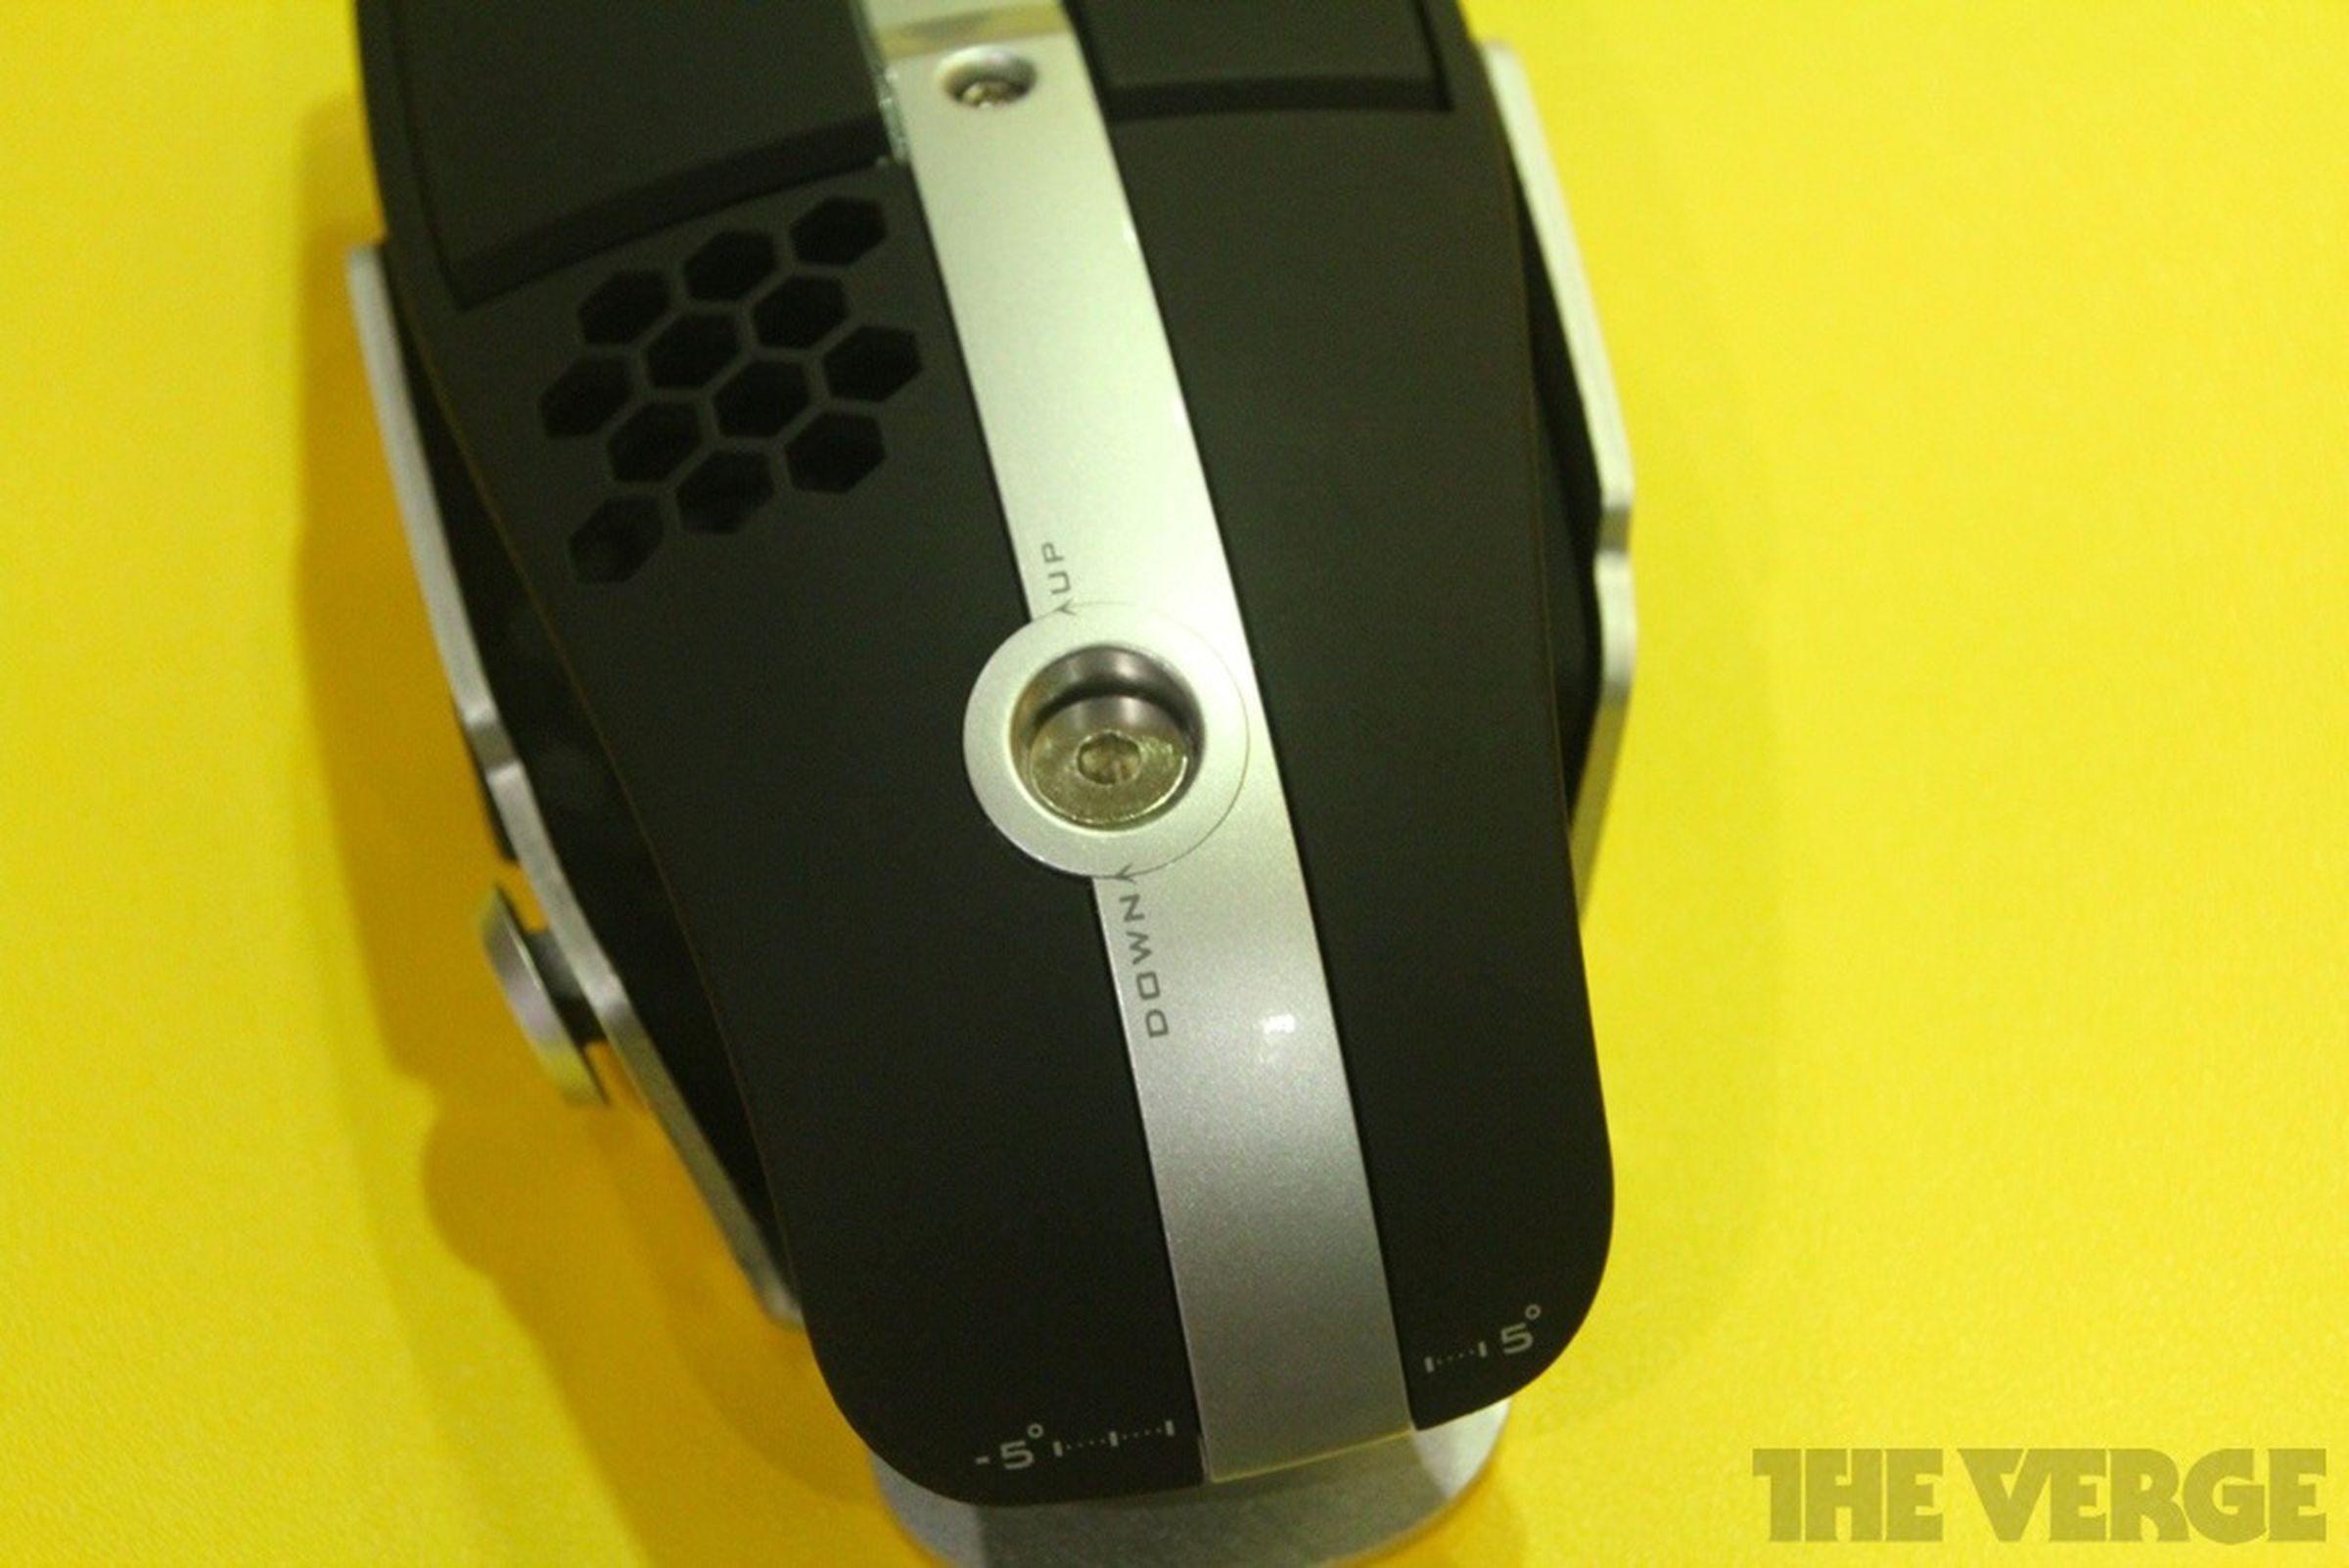 Thermaltake Level 10 M gaming mouse hands-on photos